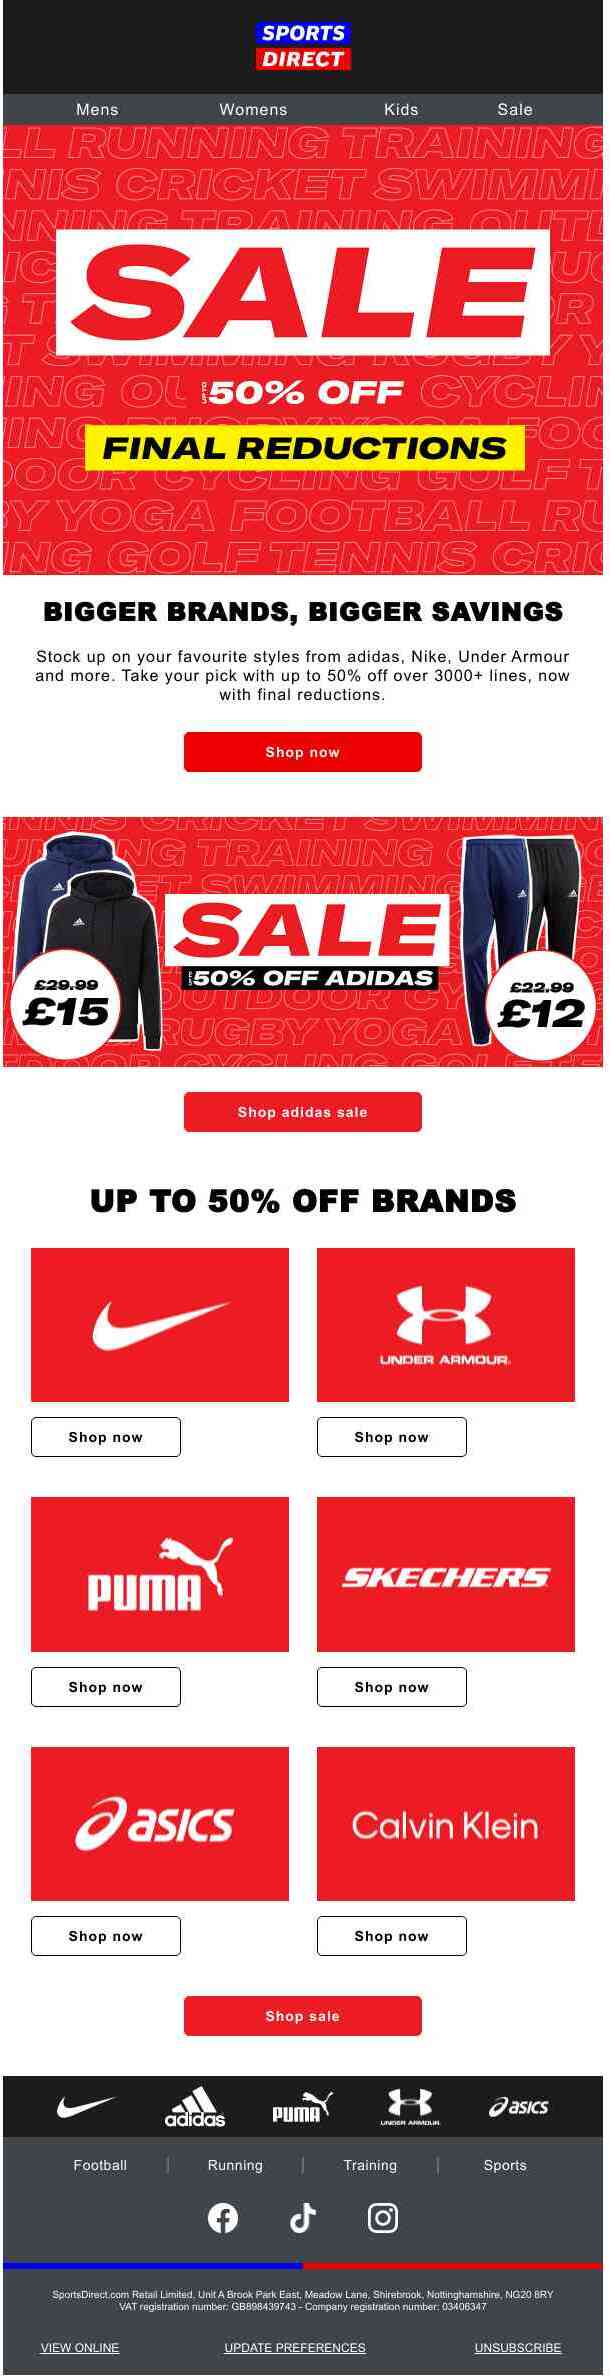 adidas, Nike and more: Up to 50% off 🔥